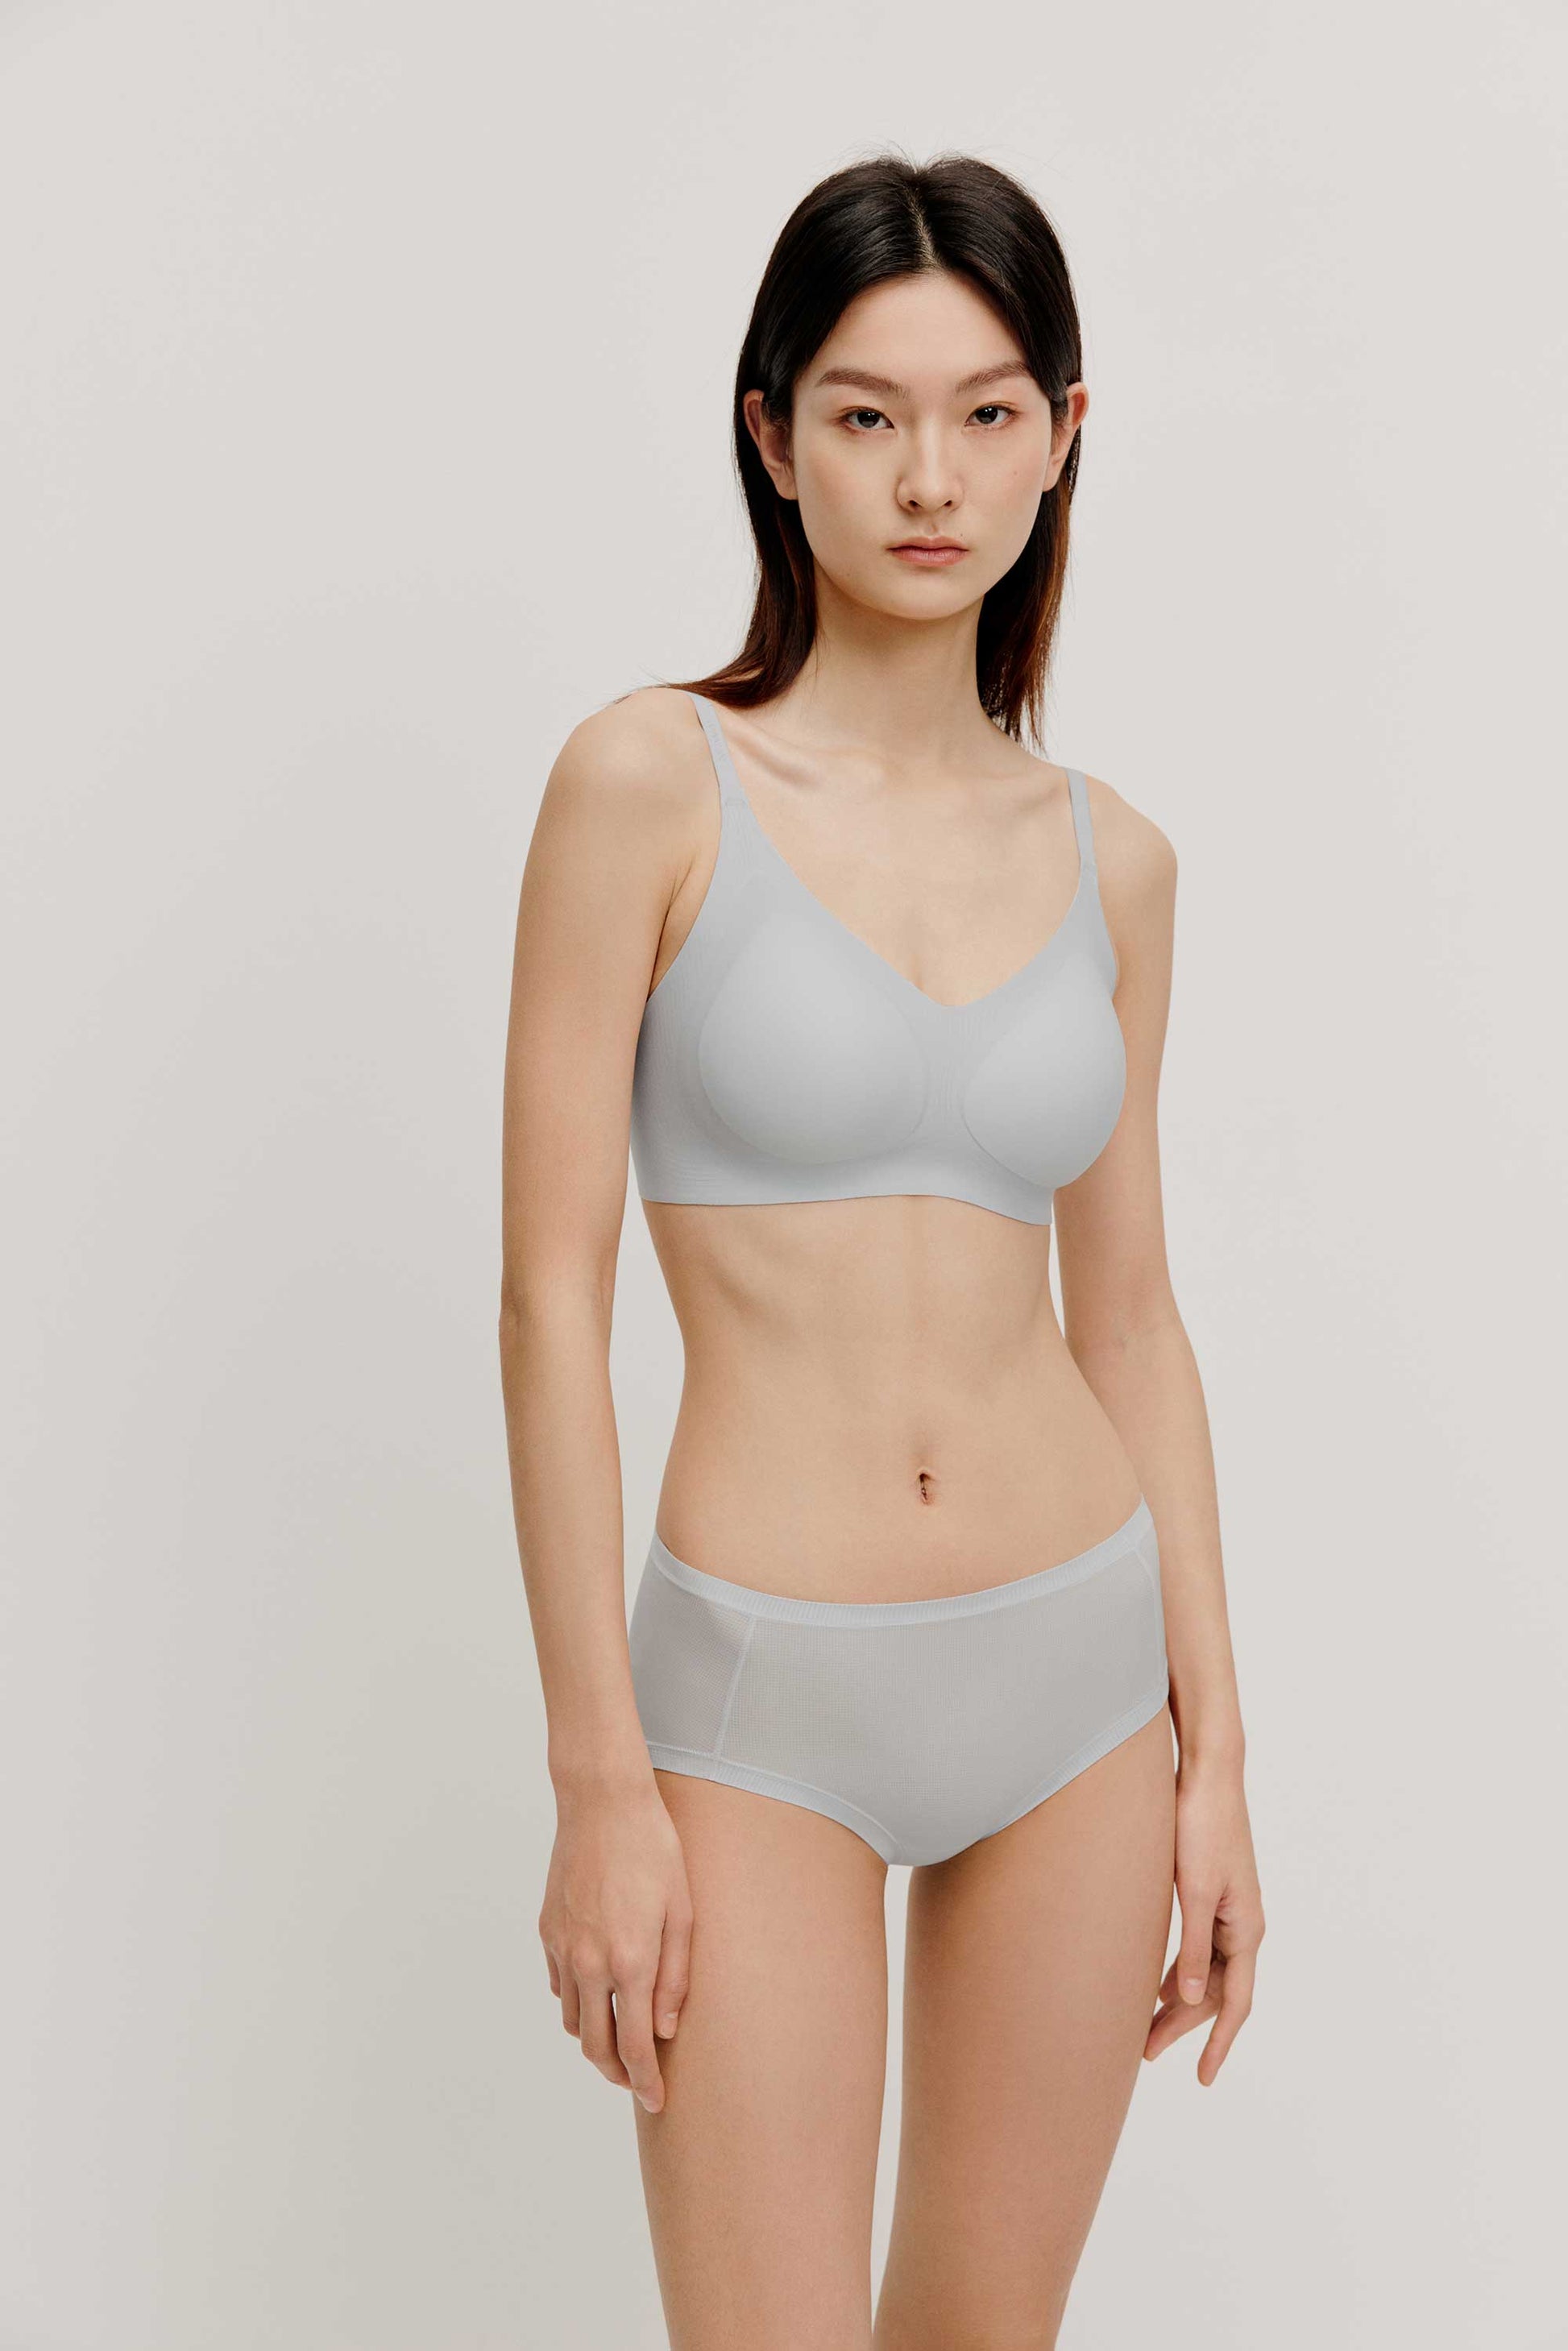 woman in light blue bra and brief